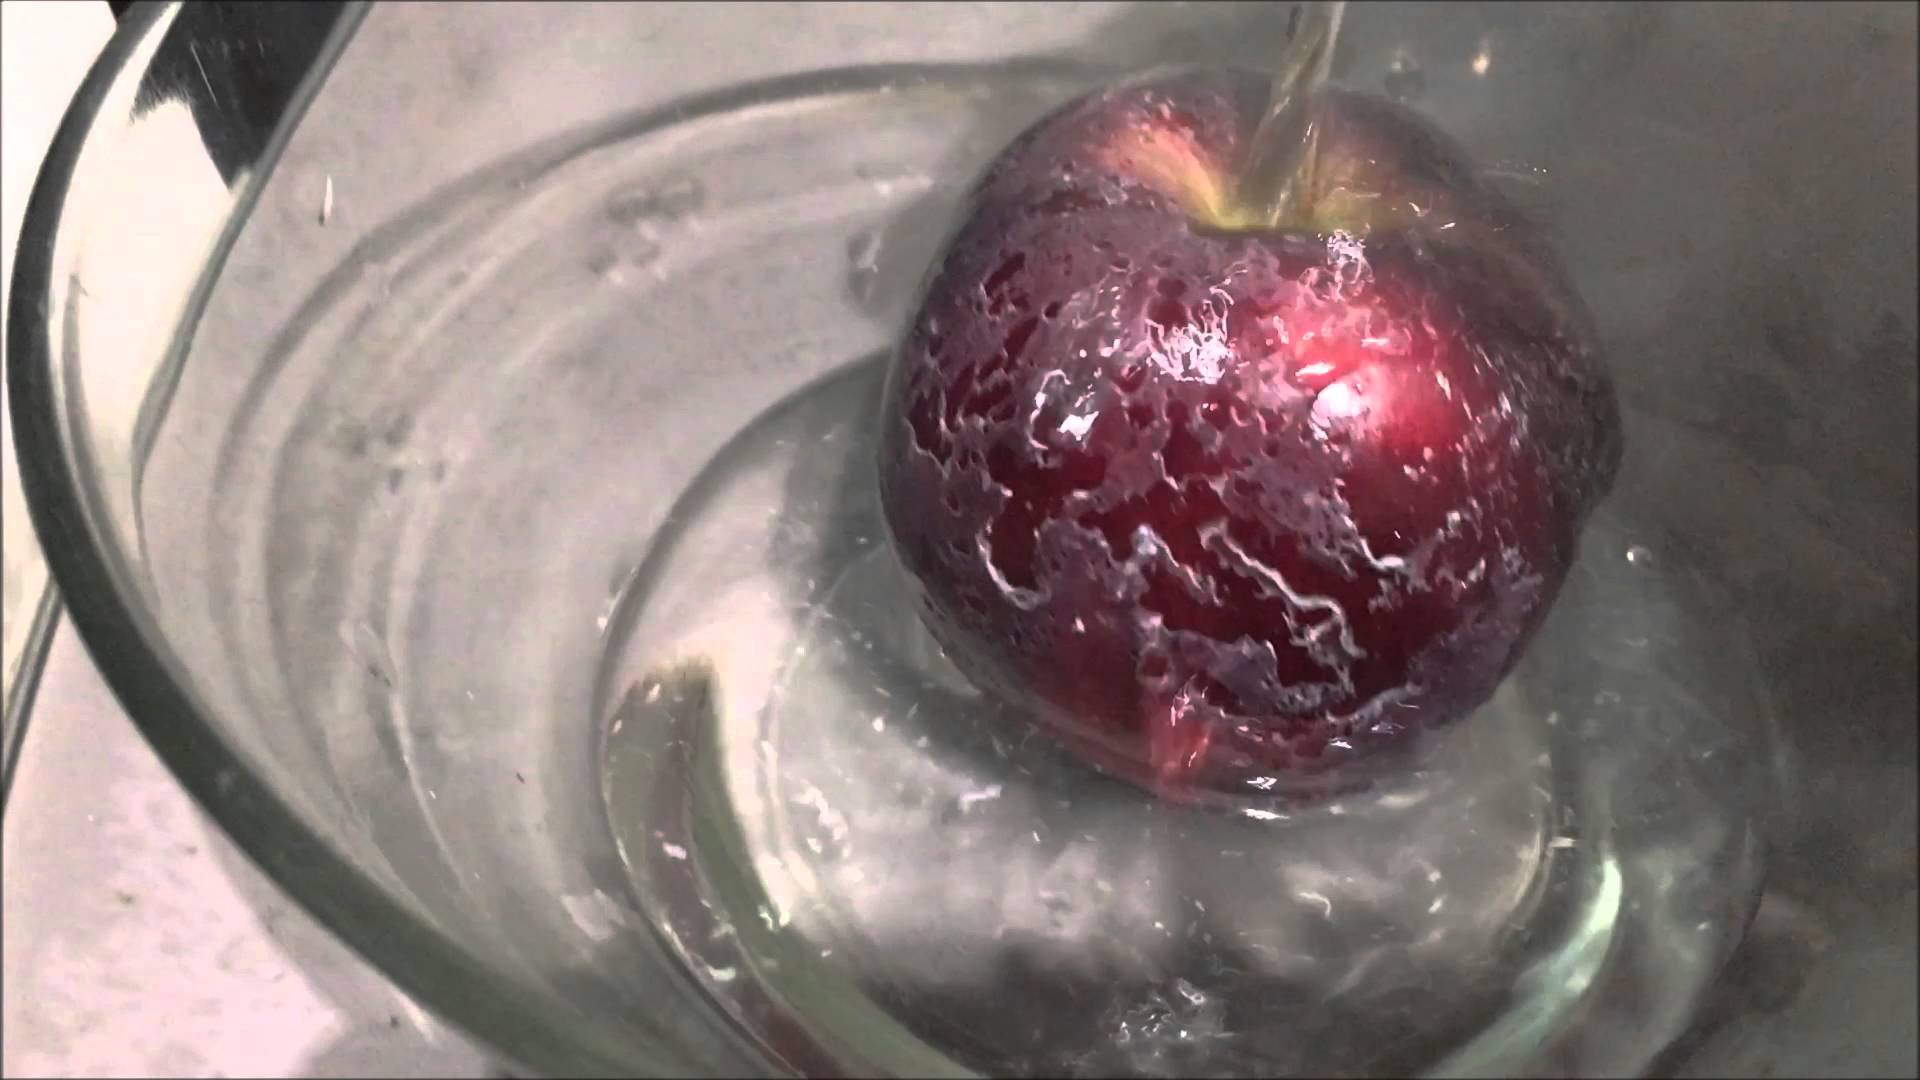 Pour Hot Water on Your Apples and See If This Common Cancer-Causing Wax APPEARS